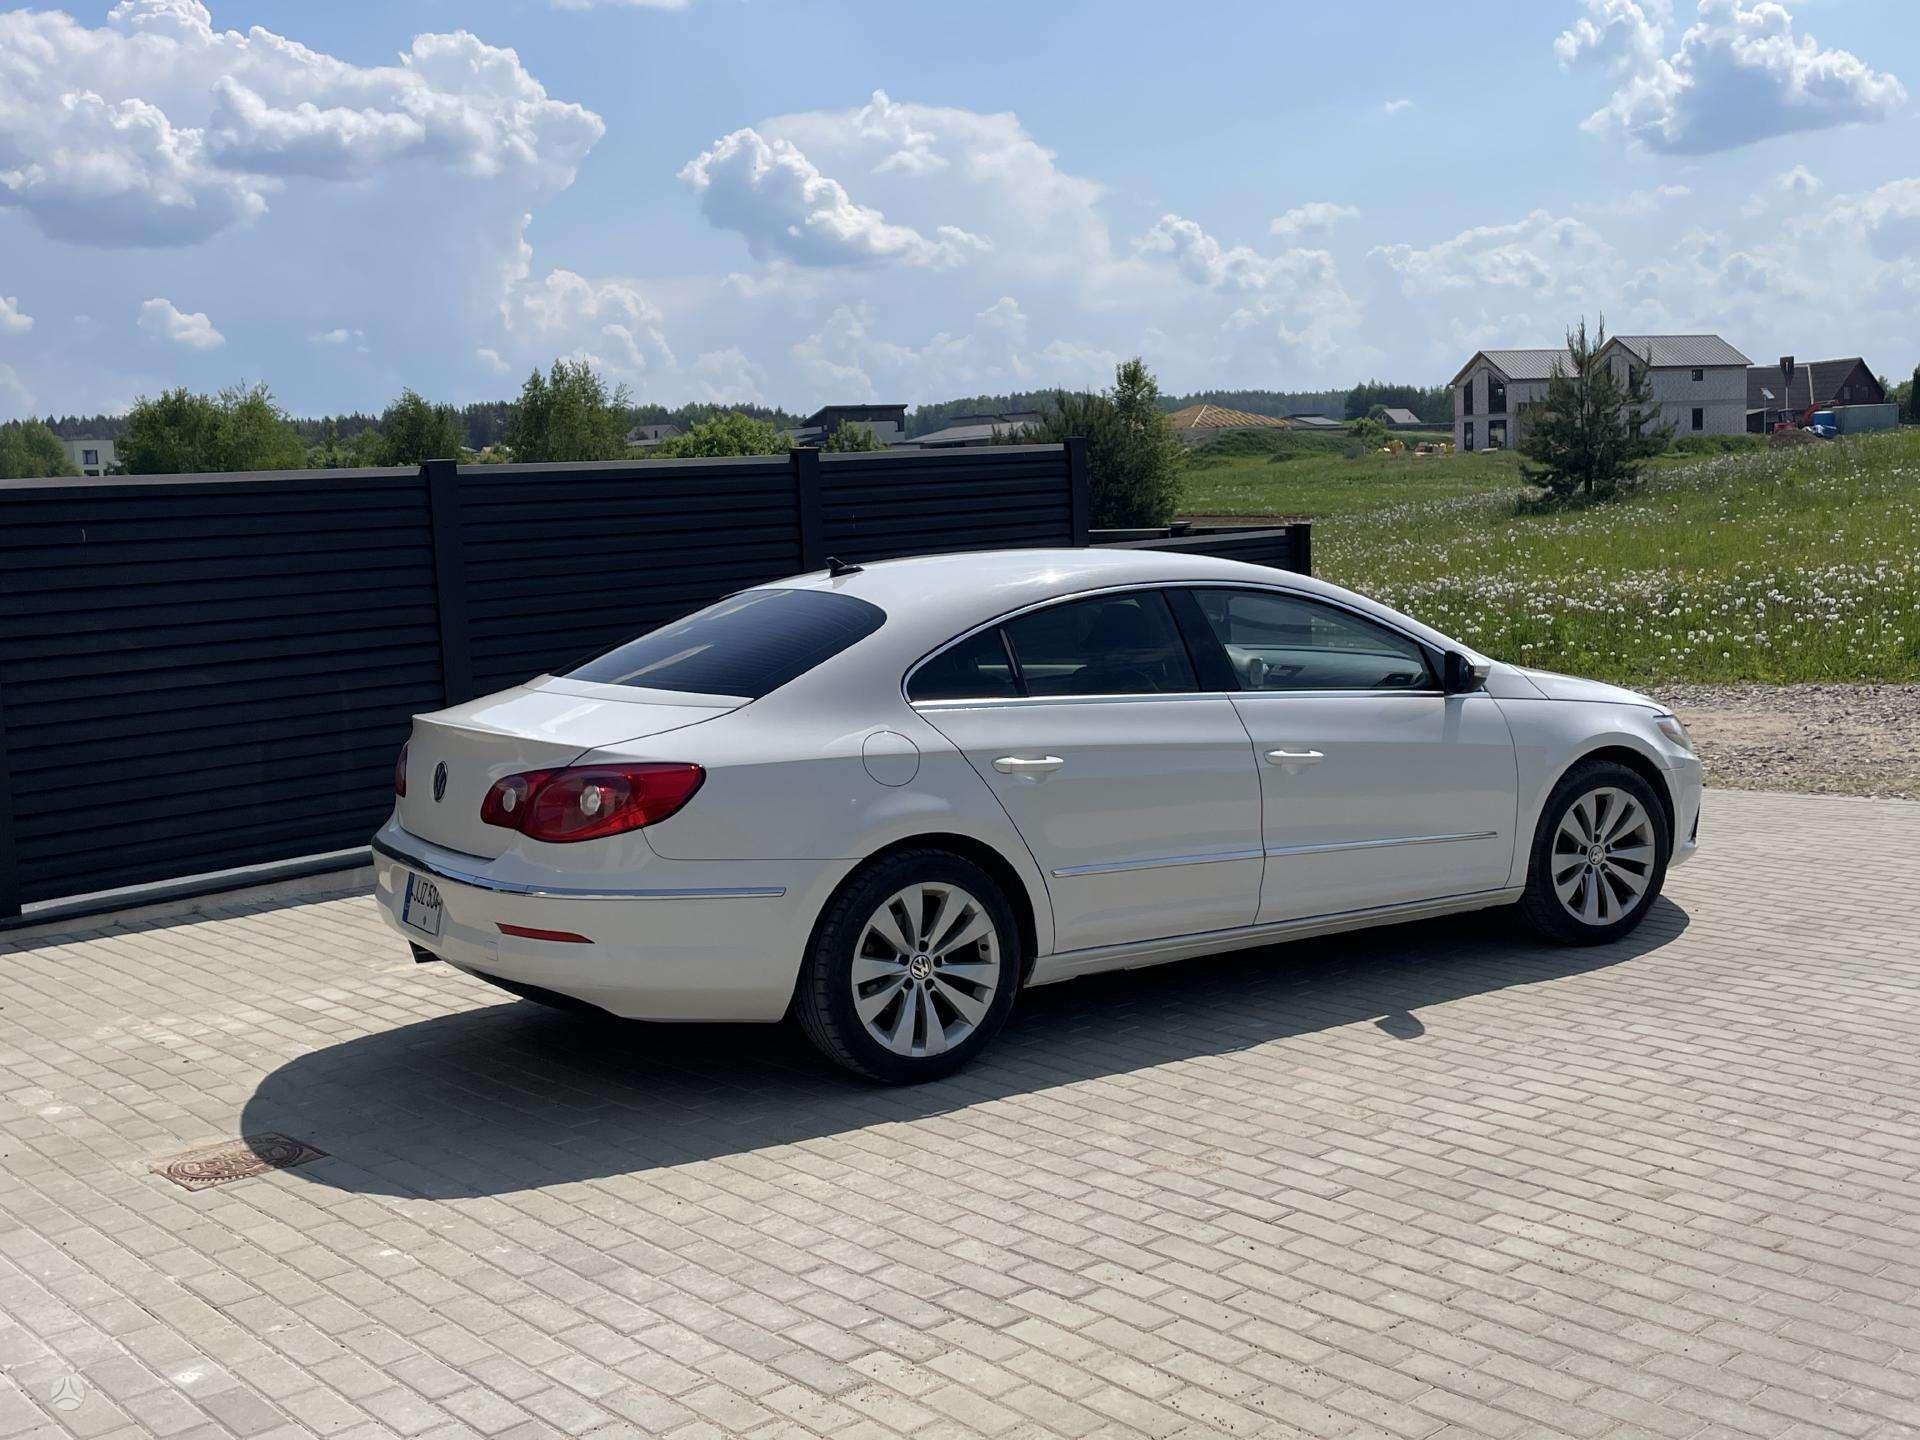 Volkswagen CC, 2.0 l., coupe  I shipped the car